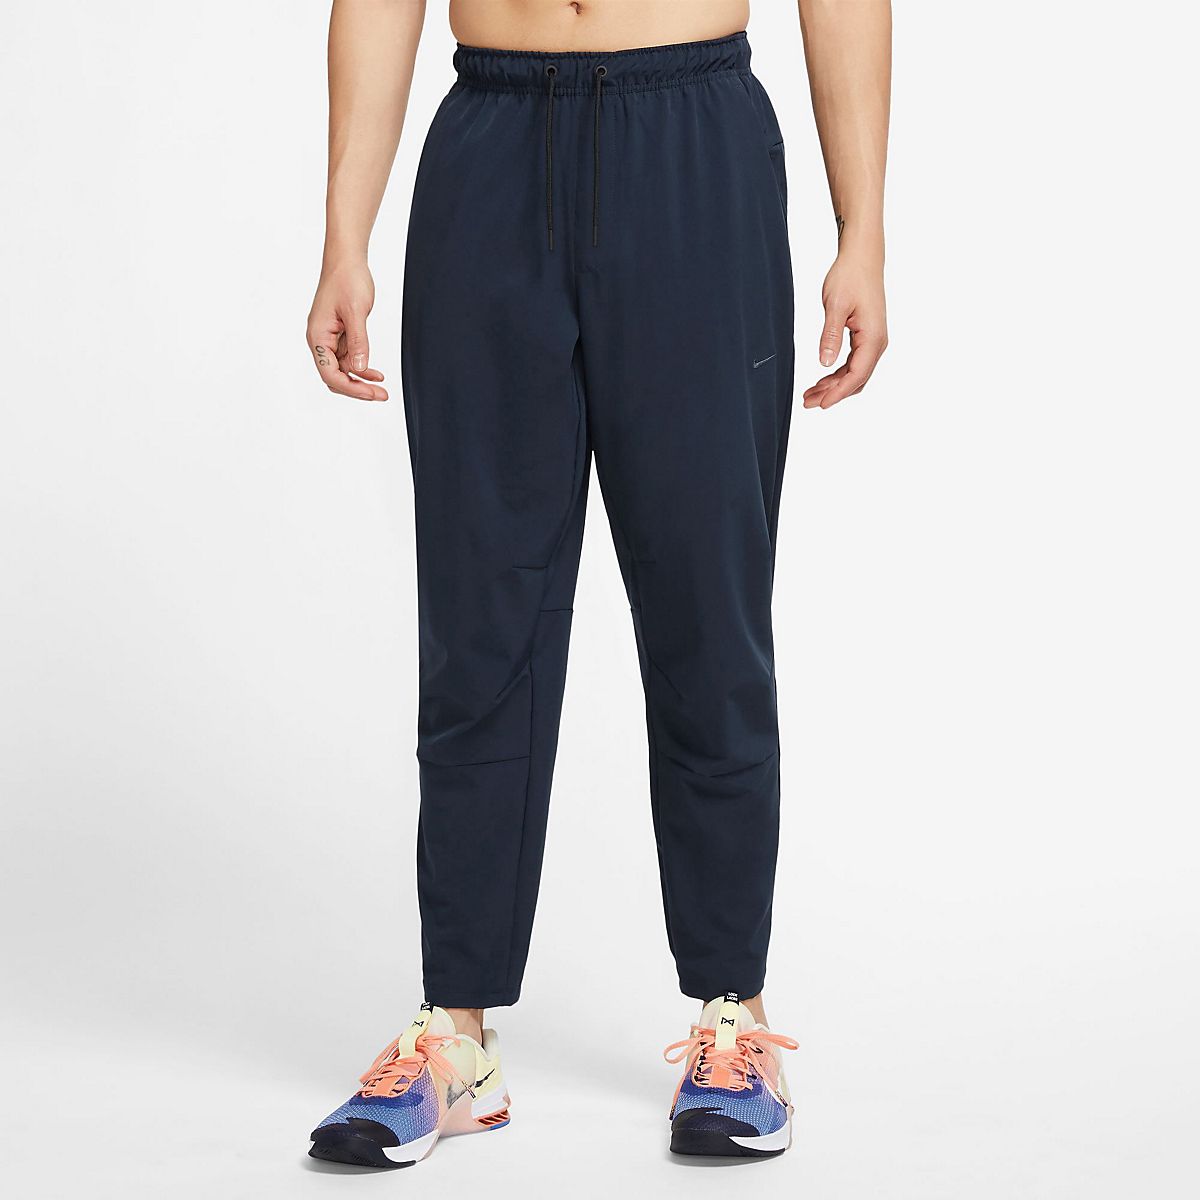 Nike Men's Unlimited Training Pants | Free Shipping at Academy